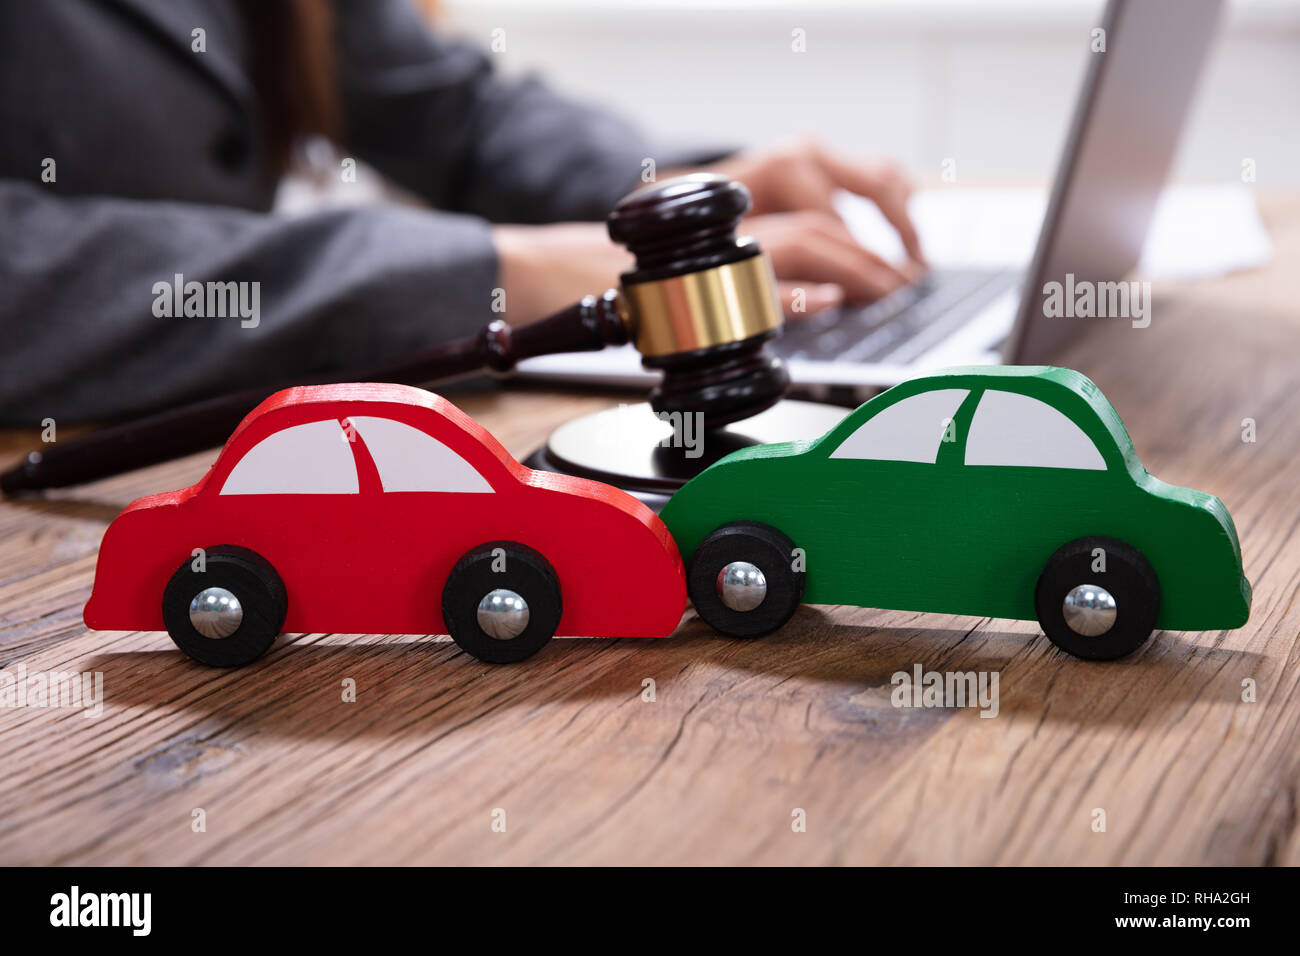 Small Green And Red Car In Front Of Gavel And Mallet And Businessperson Using Laptop Stock Photo